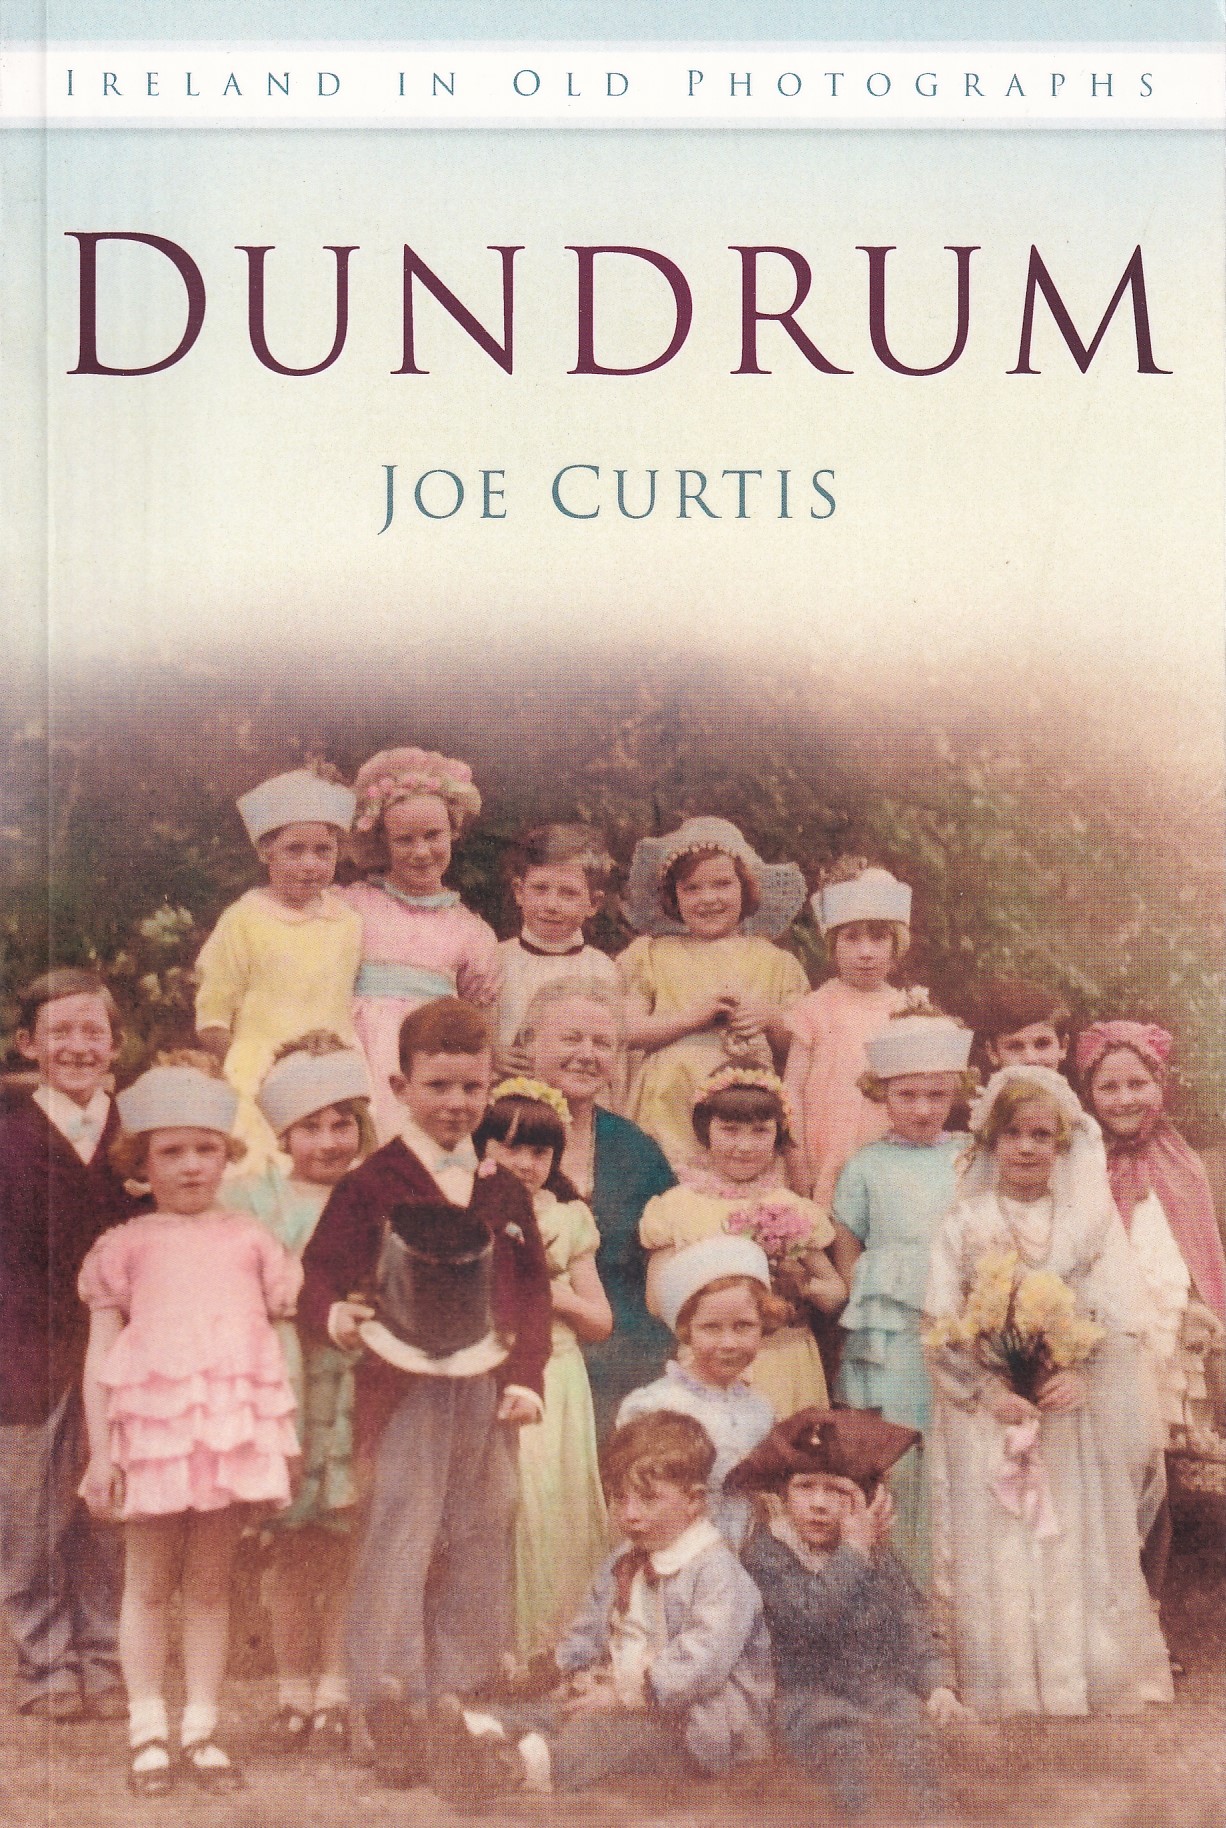 Dundrum: Ireland in Old Photographs | Joe Curtis | Charlie Byrne's